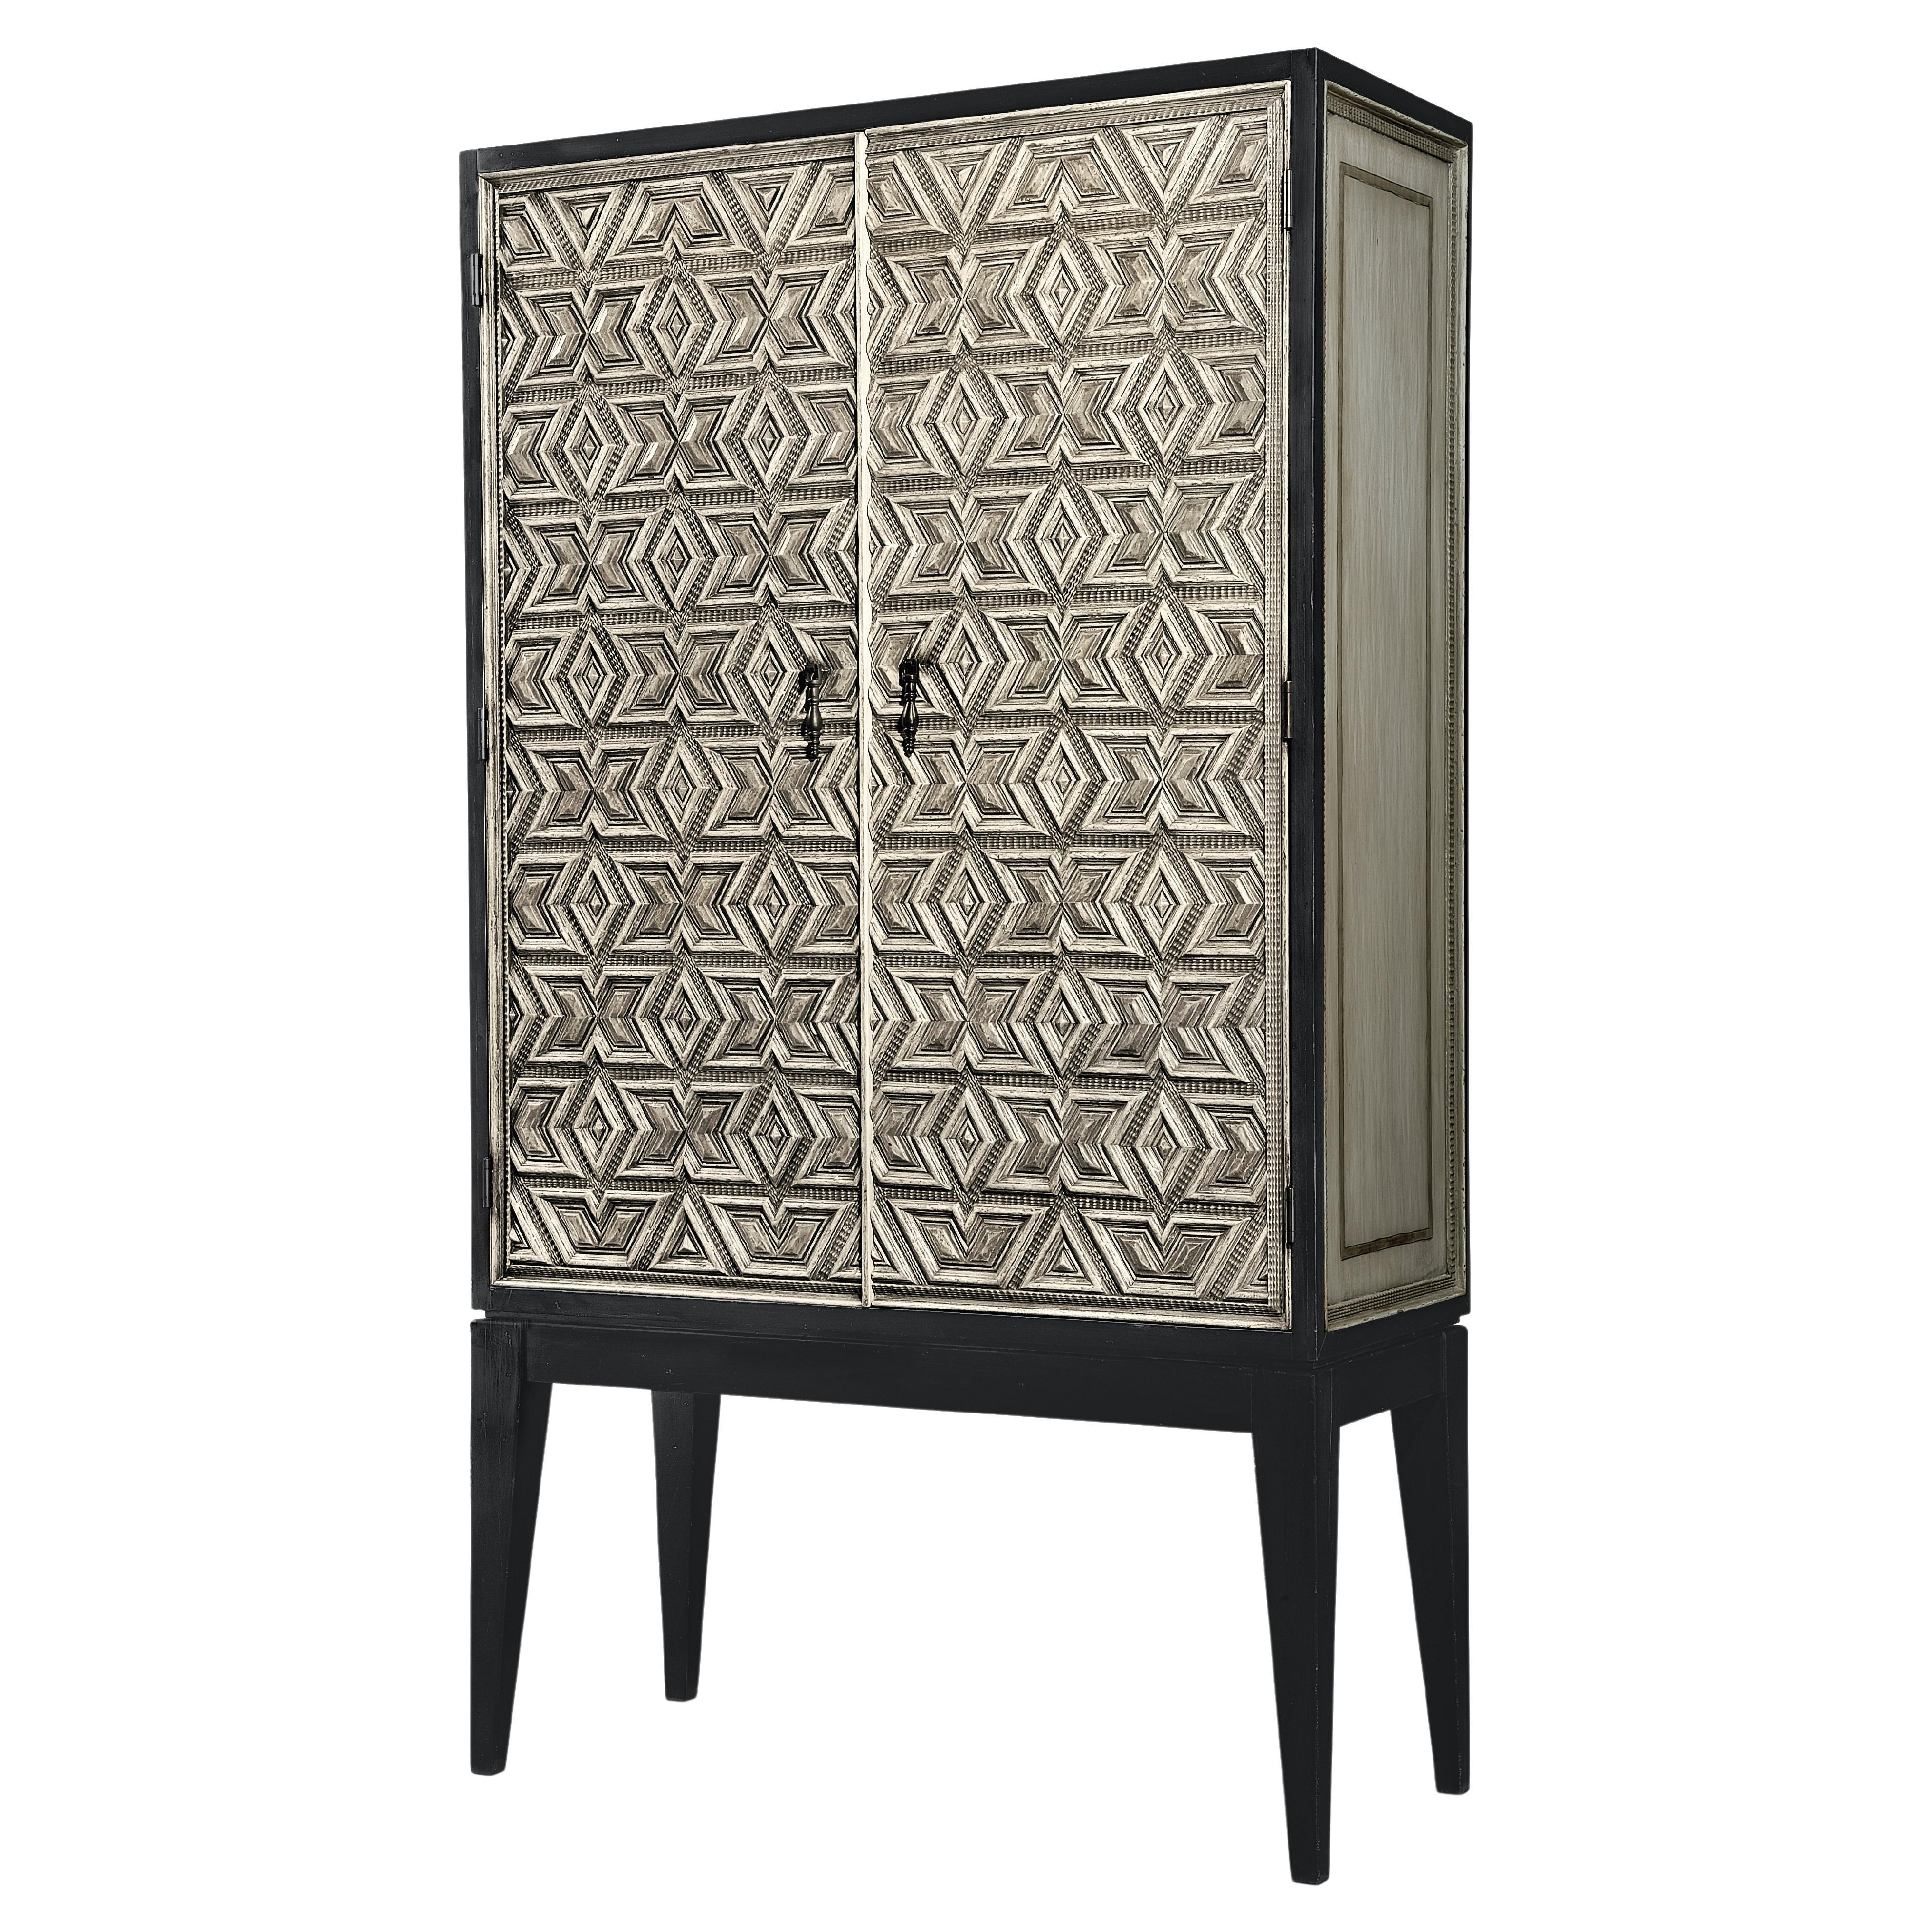 Queretano Armoire, a Statement Piece with Intricate Wood Decoration and Iron For Sale